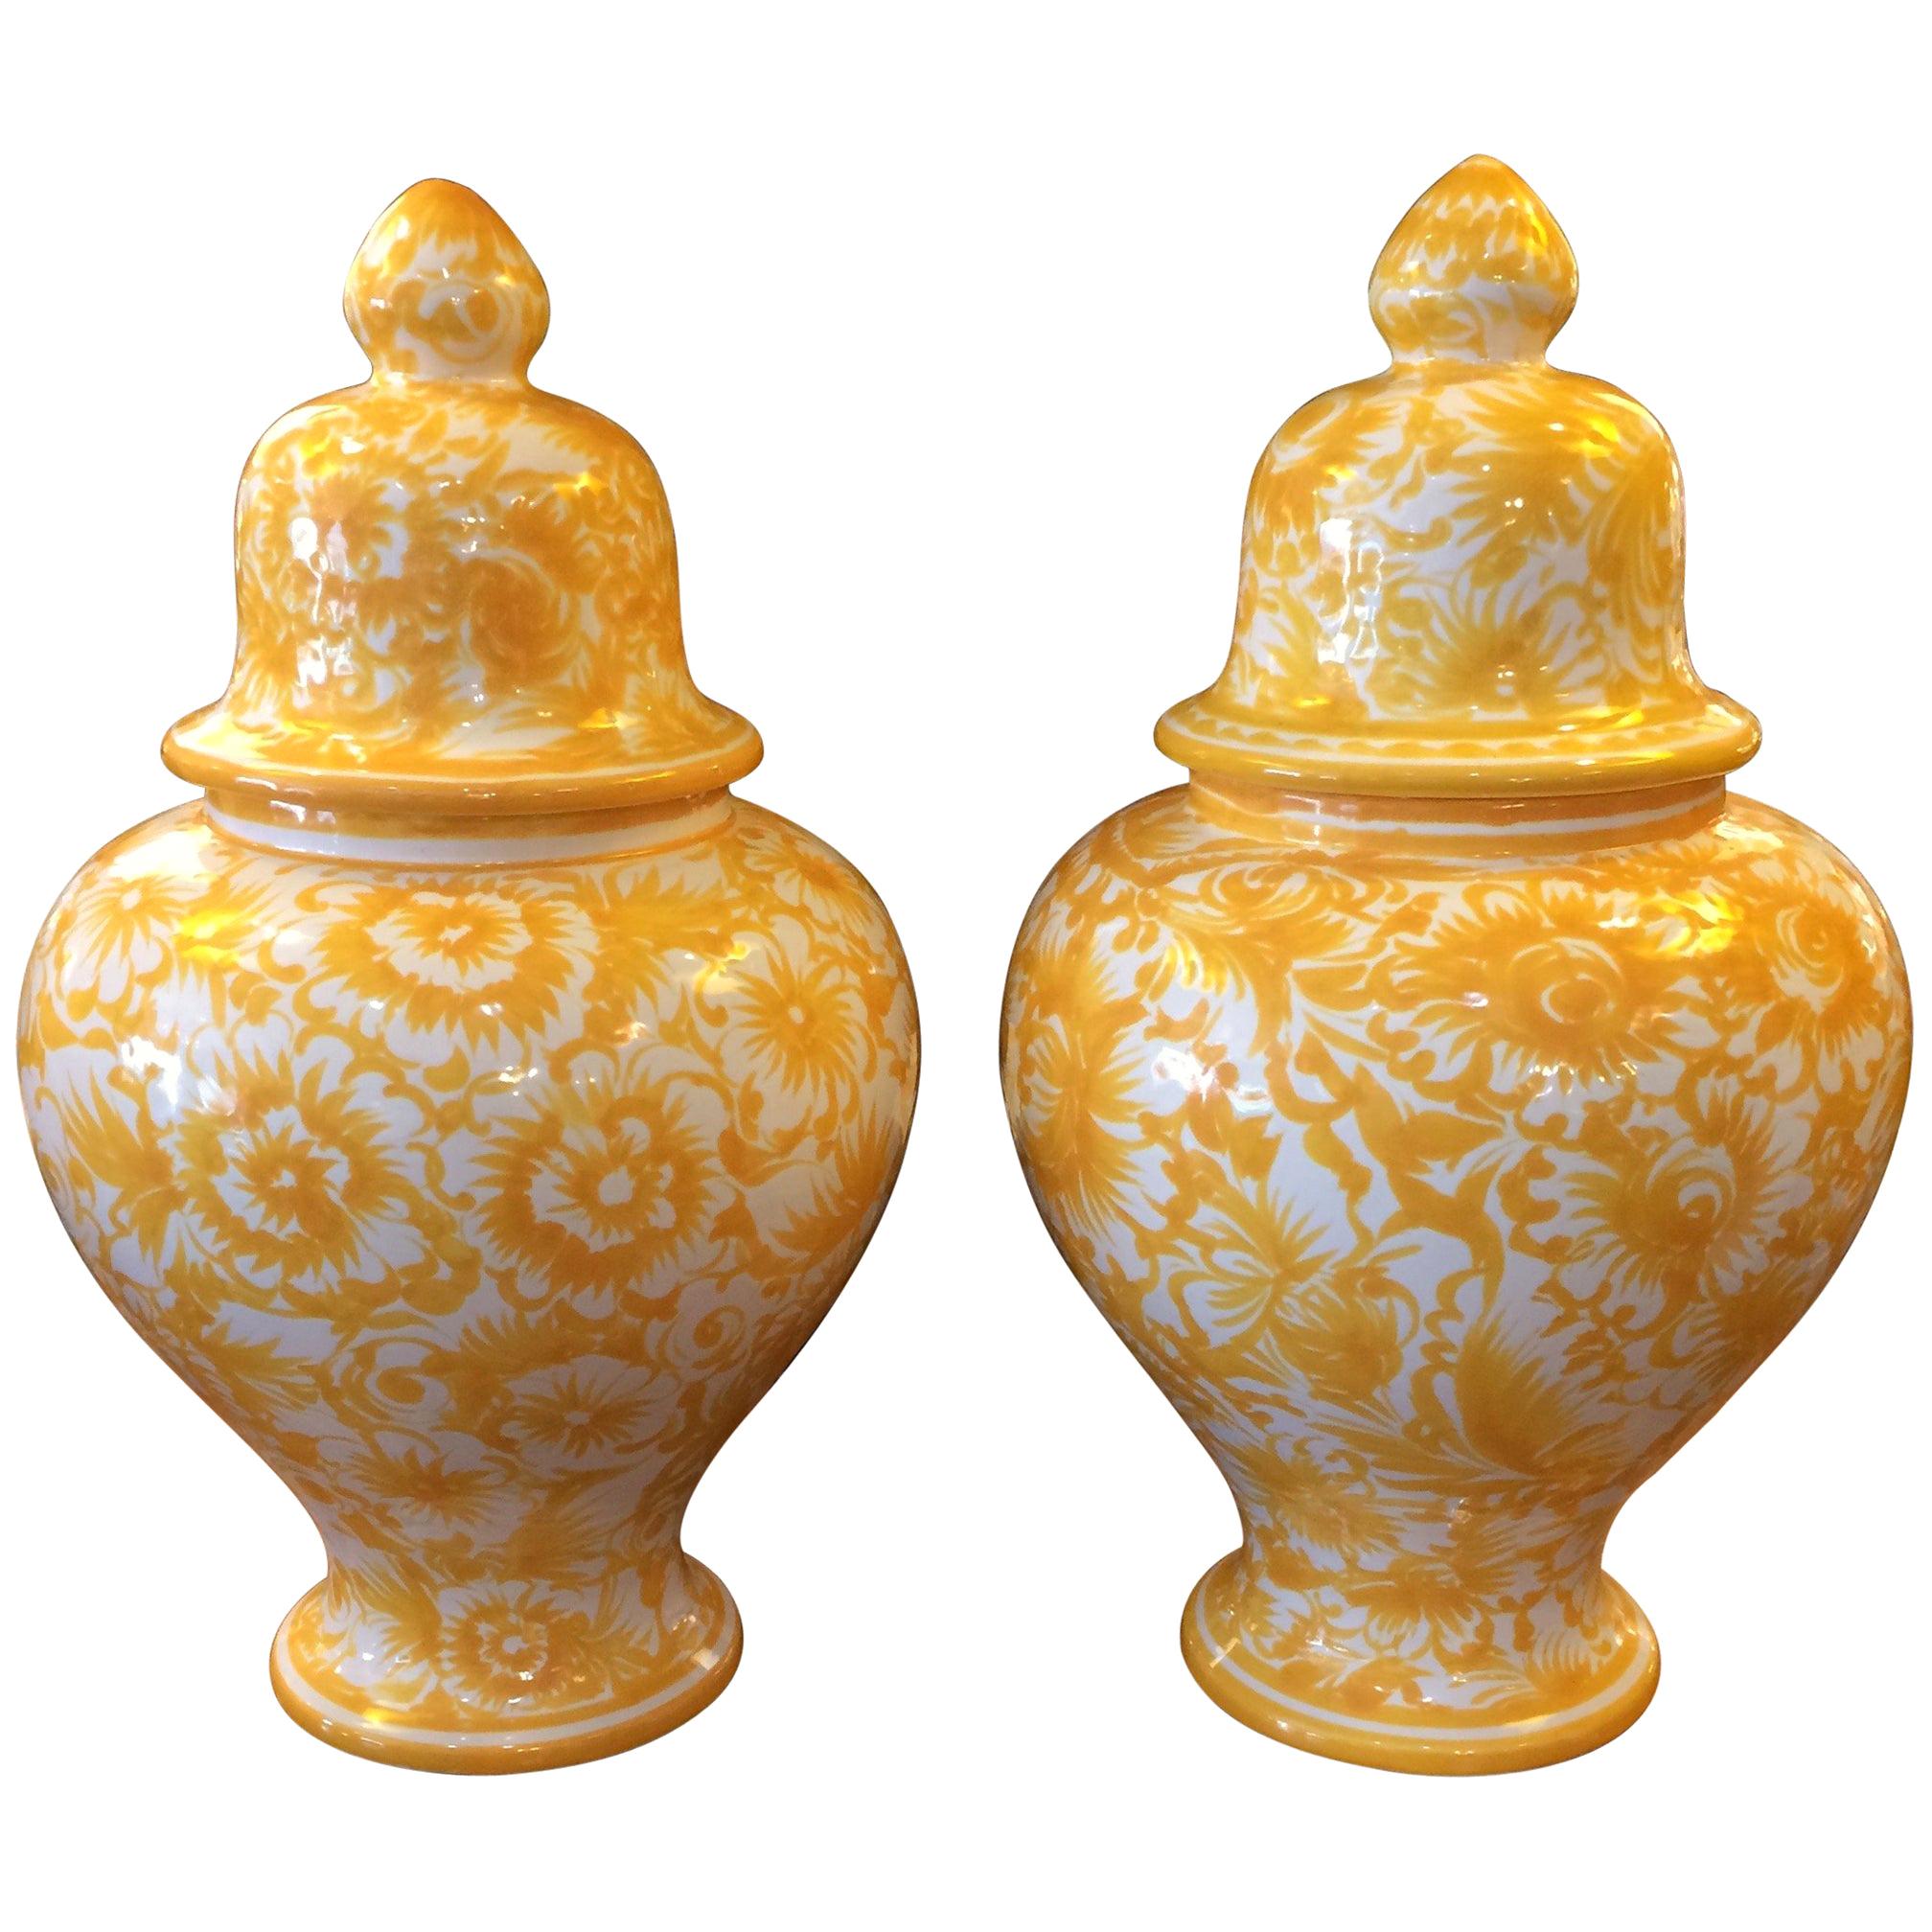 Sunny Pair of Portuguese Temple Jars Lidded Urns